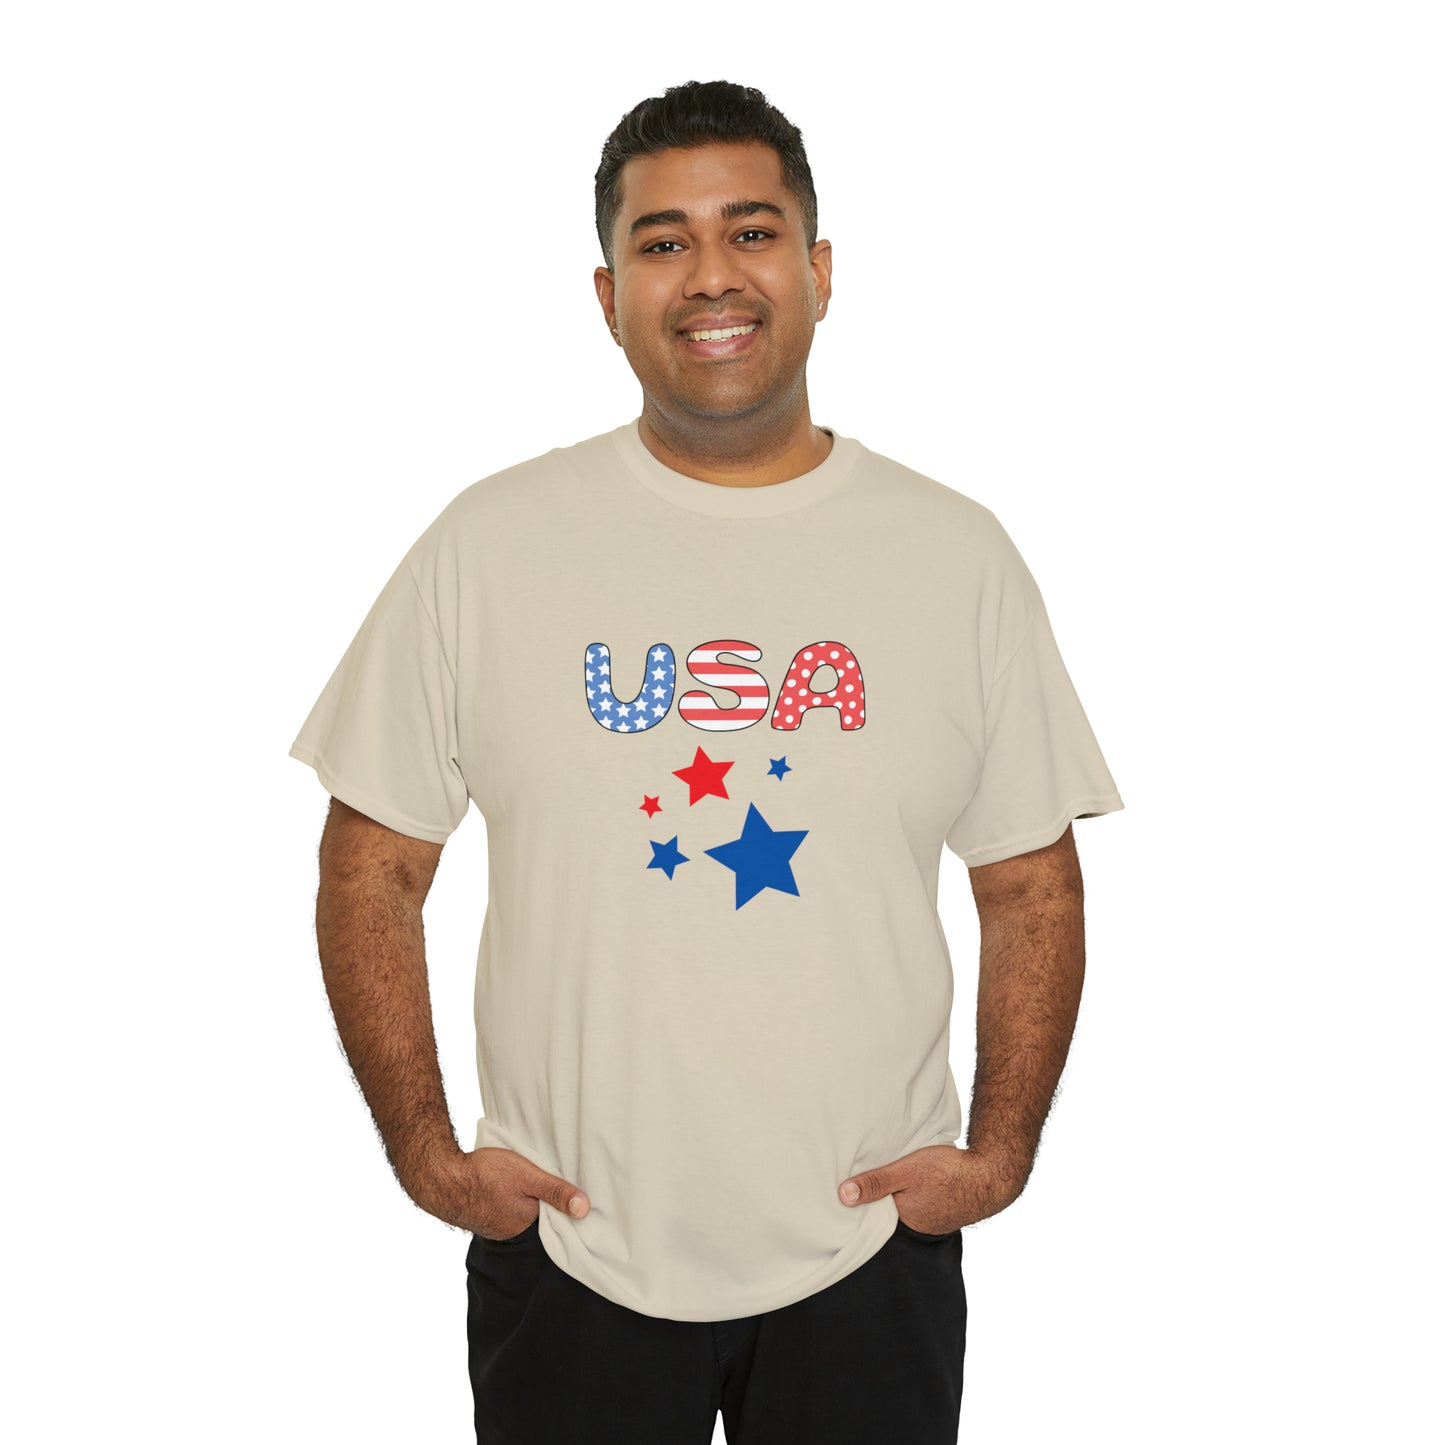 Mock up of a dark-skinned man wearing the Sand t-shirt